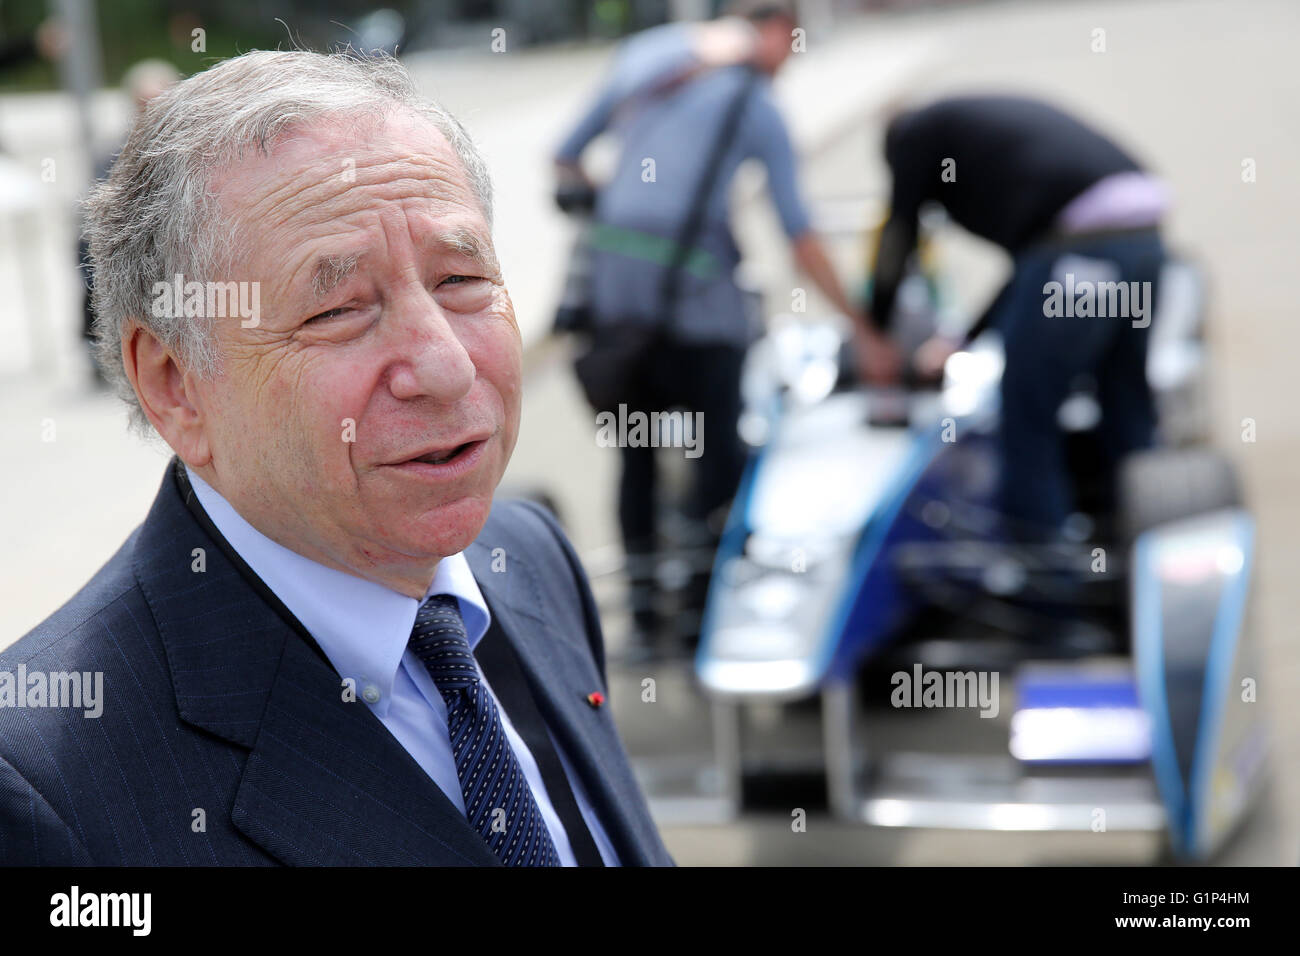 Leipzig, Germany. 18th May, 2016. Jean Todt, president of the International Automobile Federation (FIA), seen after the presentation of an electric Formula E racing car at the world summit of transport ministers in Leipzig, Germany, 18 May 2016. Some 1,000 participants from 60 countries are expected to attend the three-day summit held by the International Transport Forum of the Organisation for Economic Co-operation and Development (OECD). Photo: JAN WOITAS/dpa/Alamy Live News Stock Photo